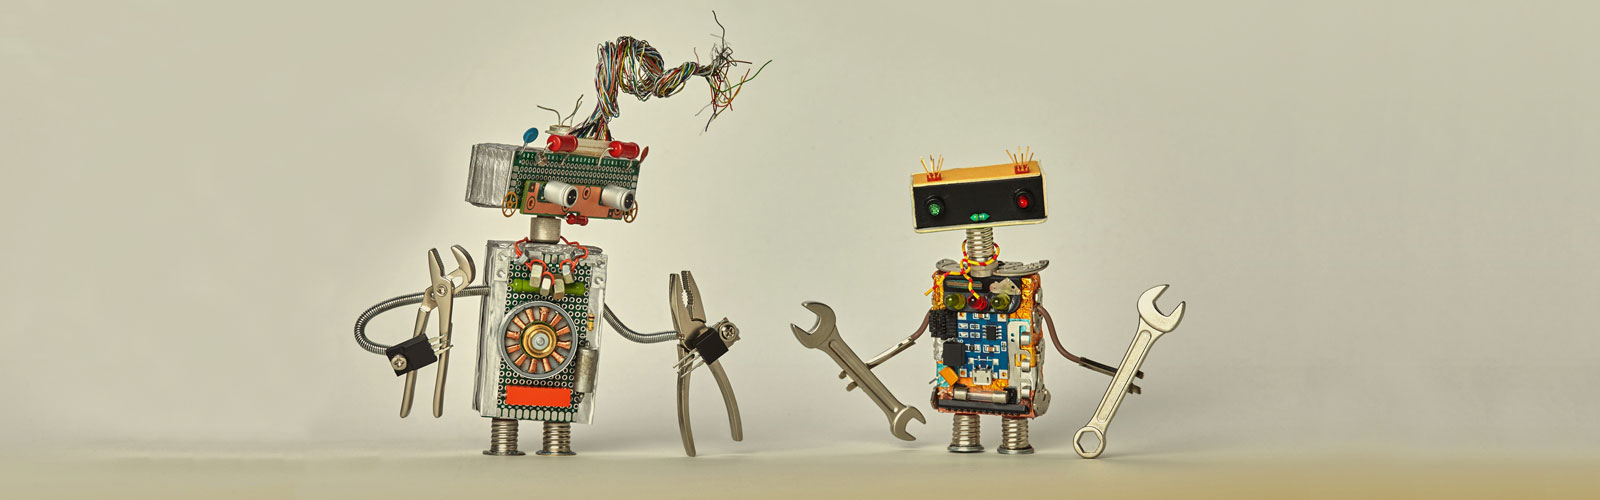 robots with tools